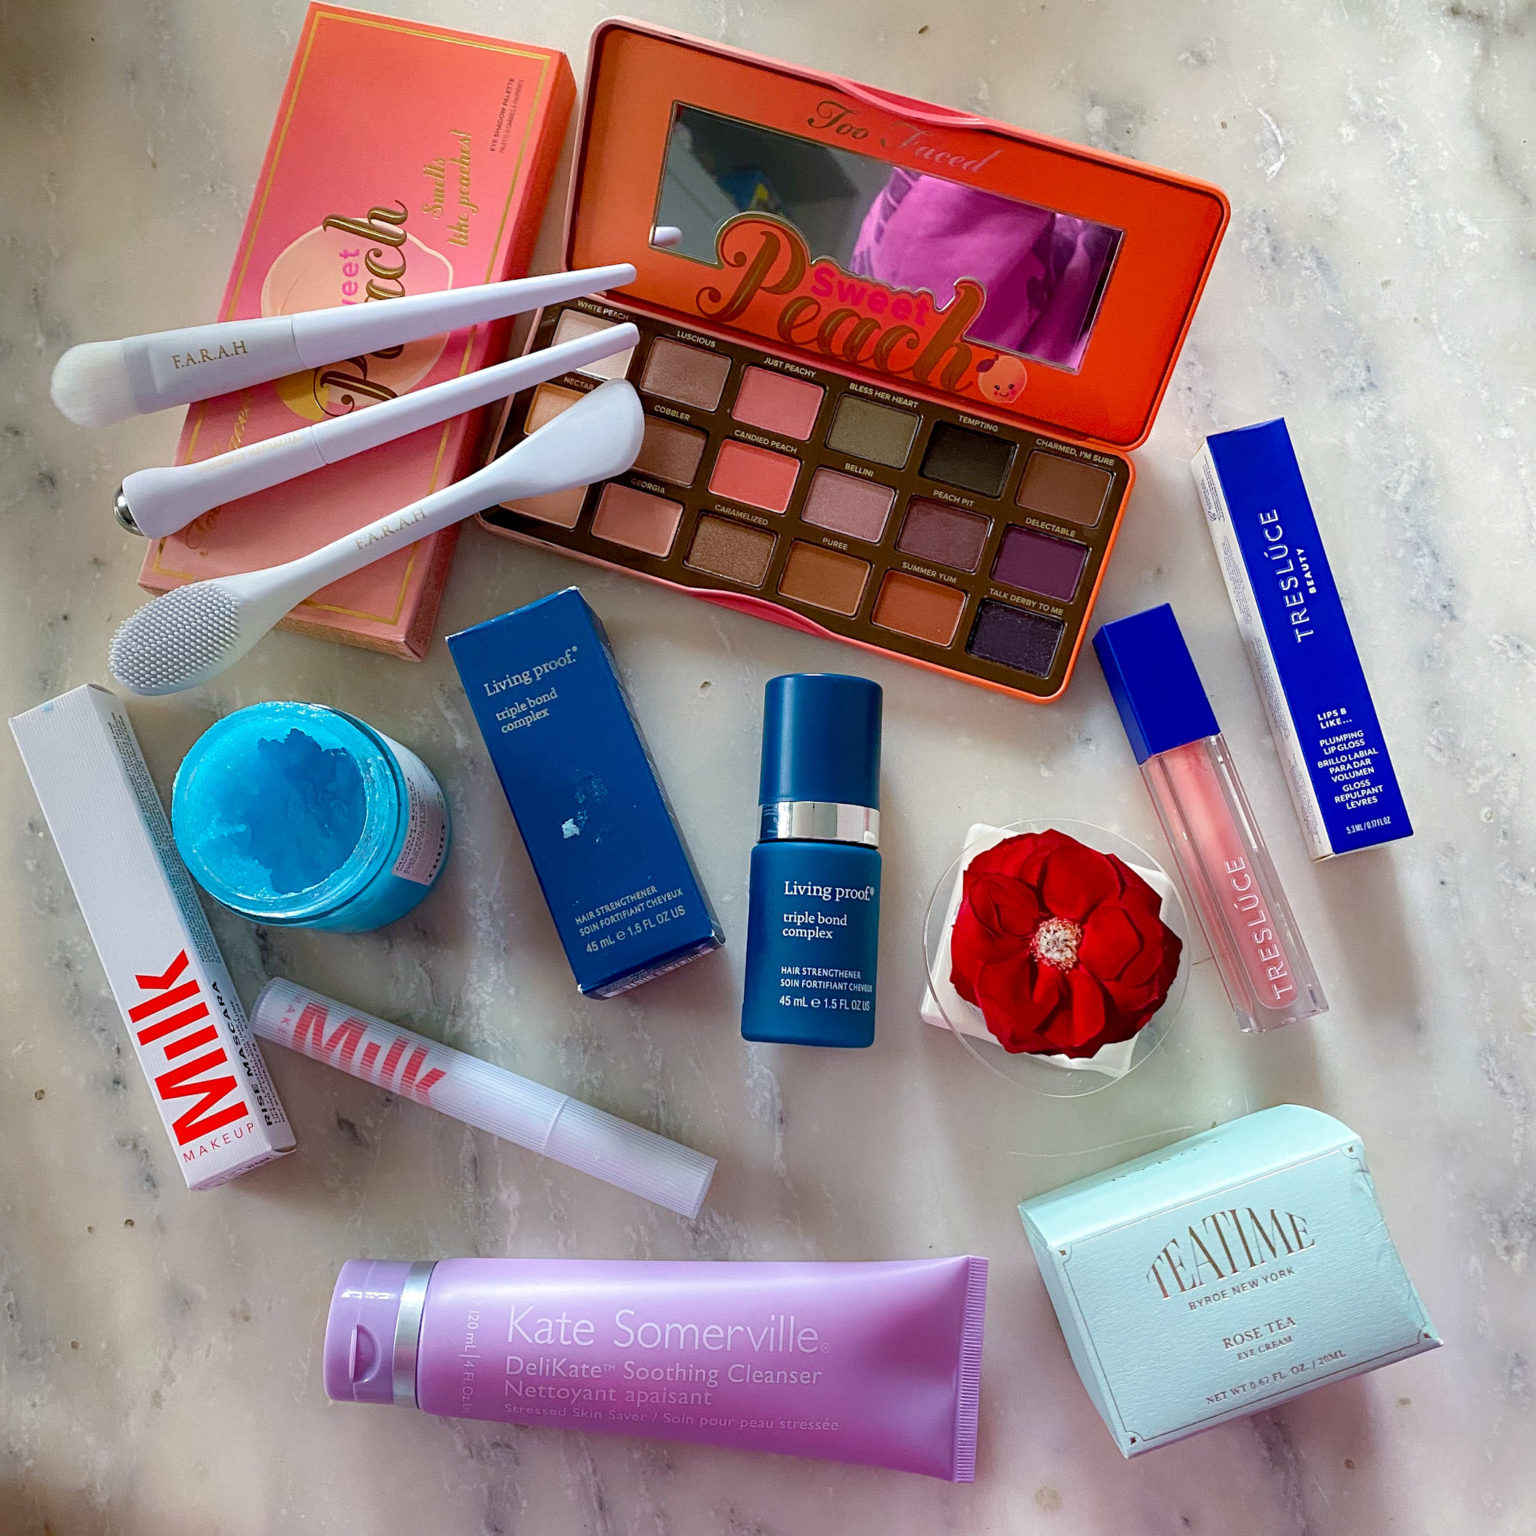 IPSY Icon Box Reviews: Everything You Need To Know